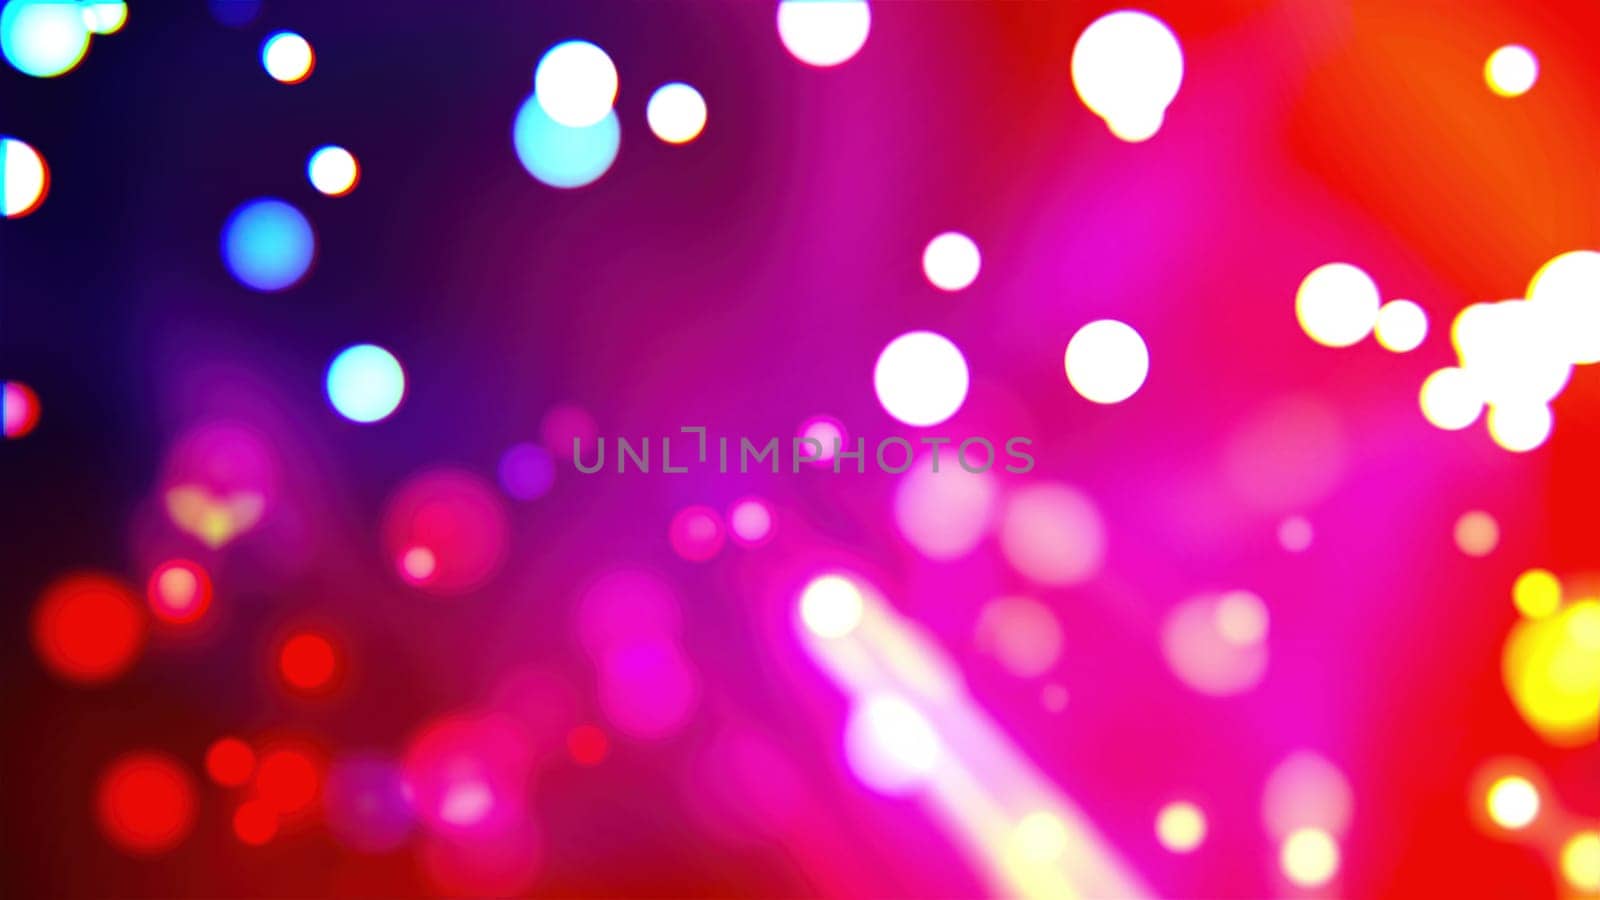 Bokeh particles with gradient background. Computer generated 3d render